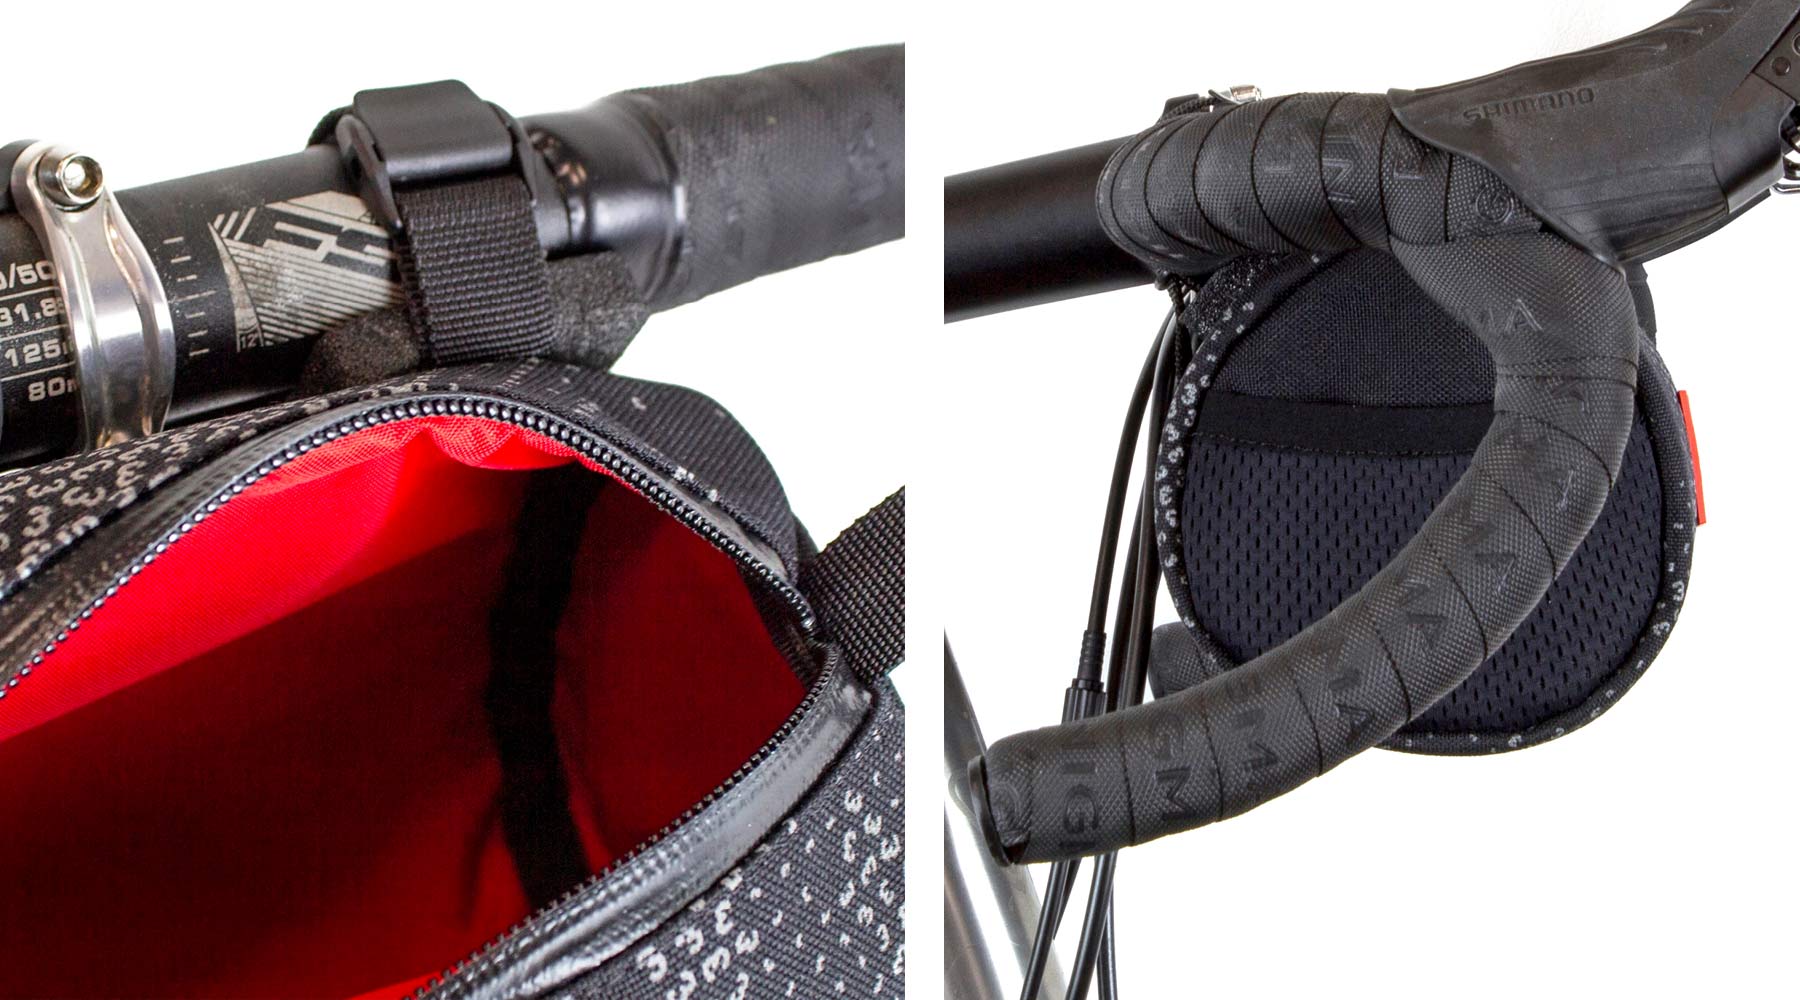 Restrap x CHPT3 Limited Run 03 special edition small bike bags